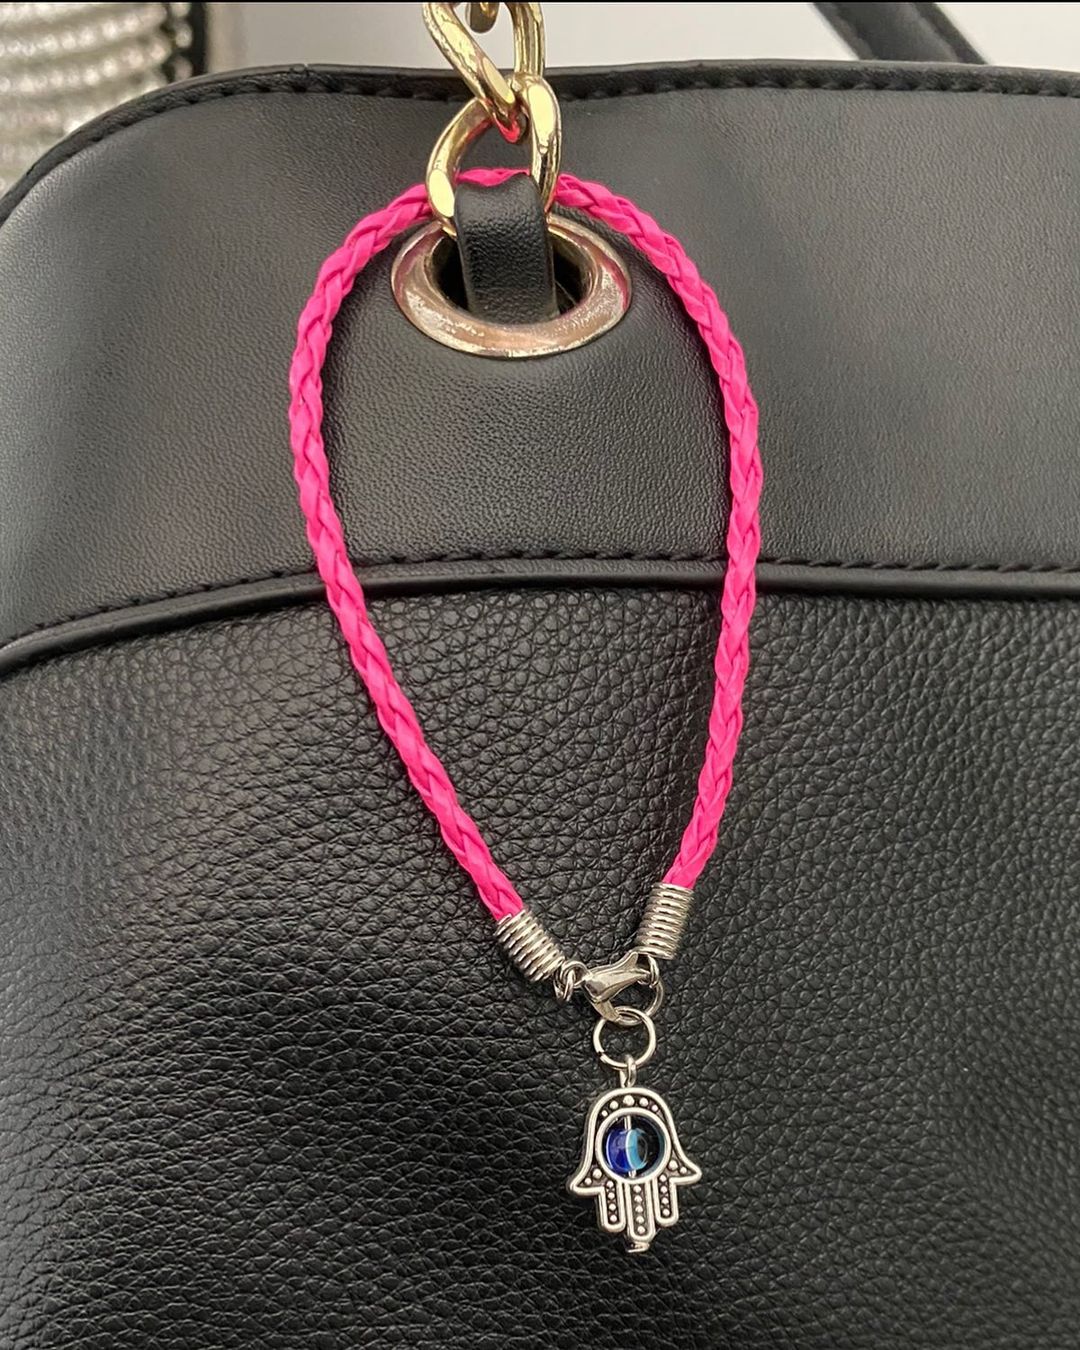 $5 bag charm (includes mailing). Comes in all different colors. All proceeds go to the rescue! 🧿🐶😻 This will make a great stocking stuffer and it’s for a great cause- to help support the furbabies. Message https://www.instagram.com/charitablelovebeads or text 954-650-4859 to order yours.